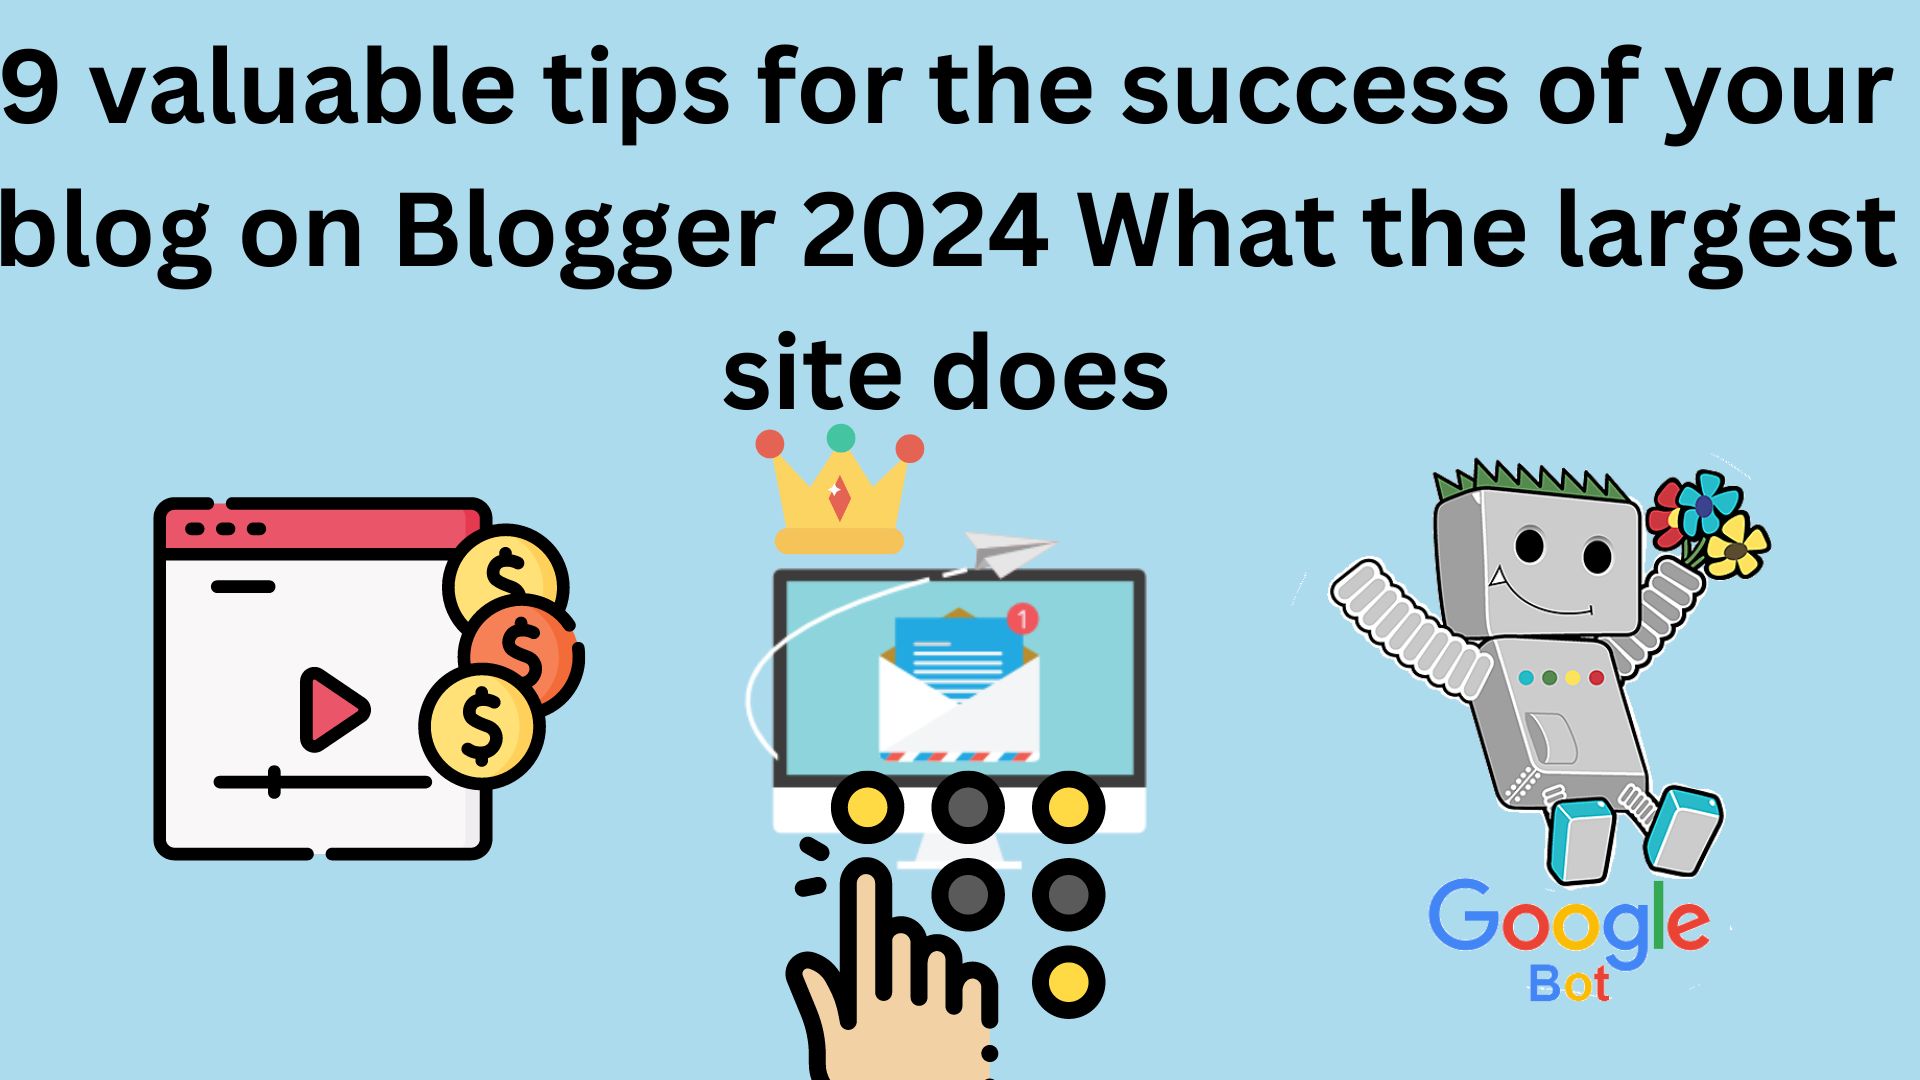 9 Valuable Tips For The Success Of Your Blog On Blogger 2024 What The Largest Site Does